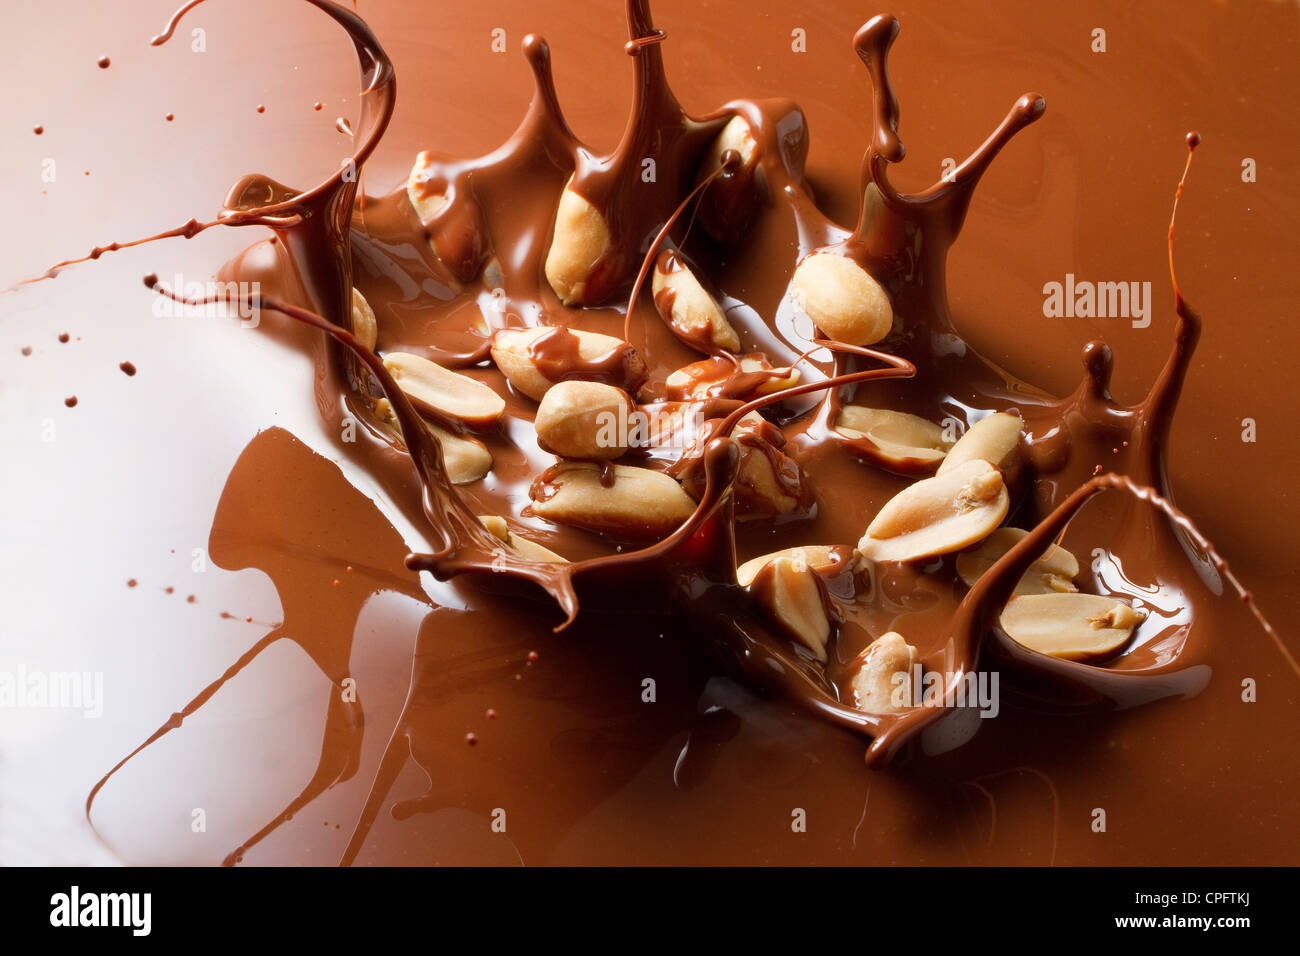 Mixture Of Chocolate And Peanuts Stock Photo